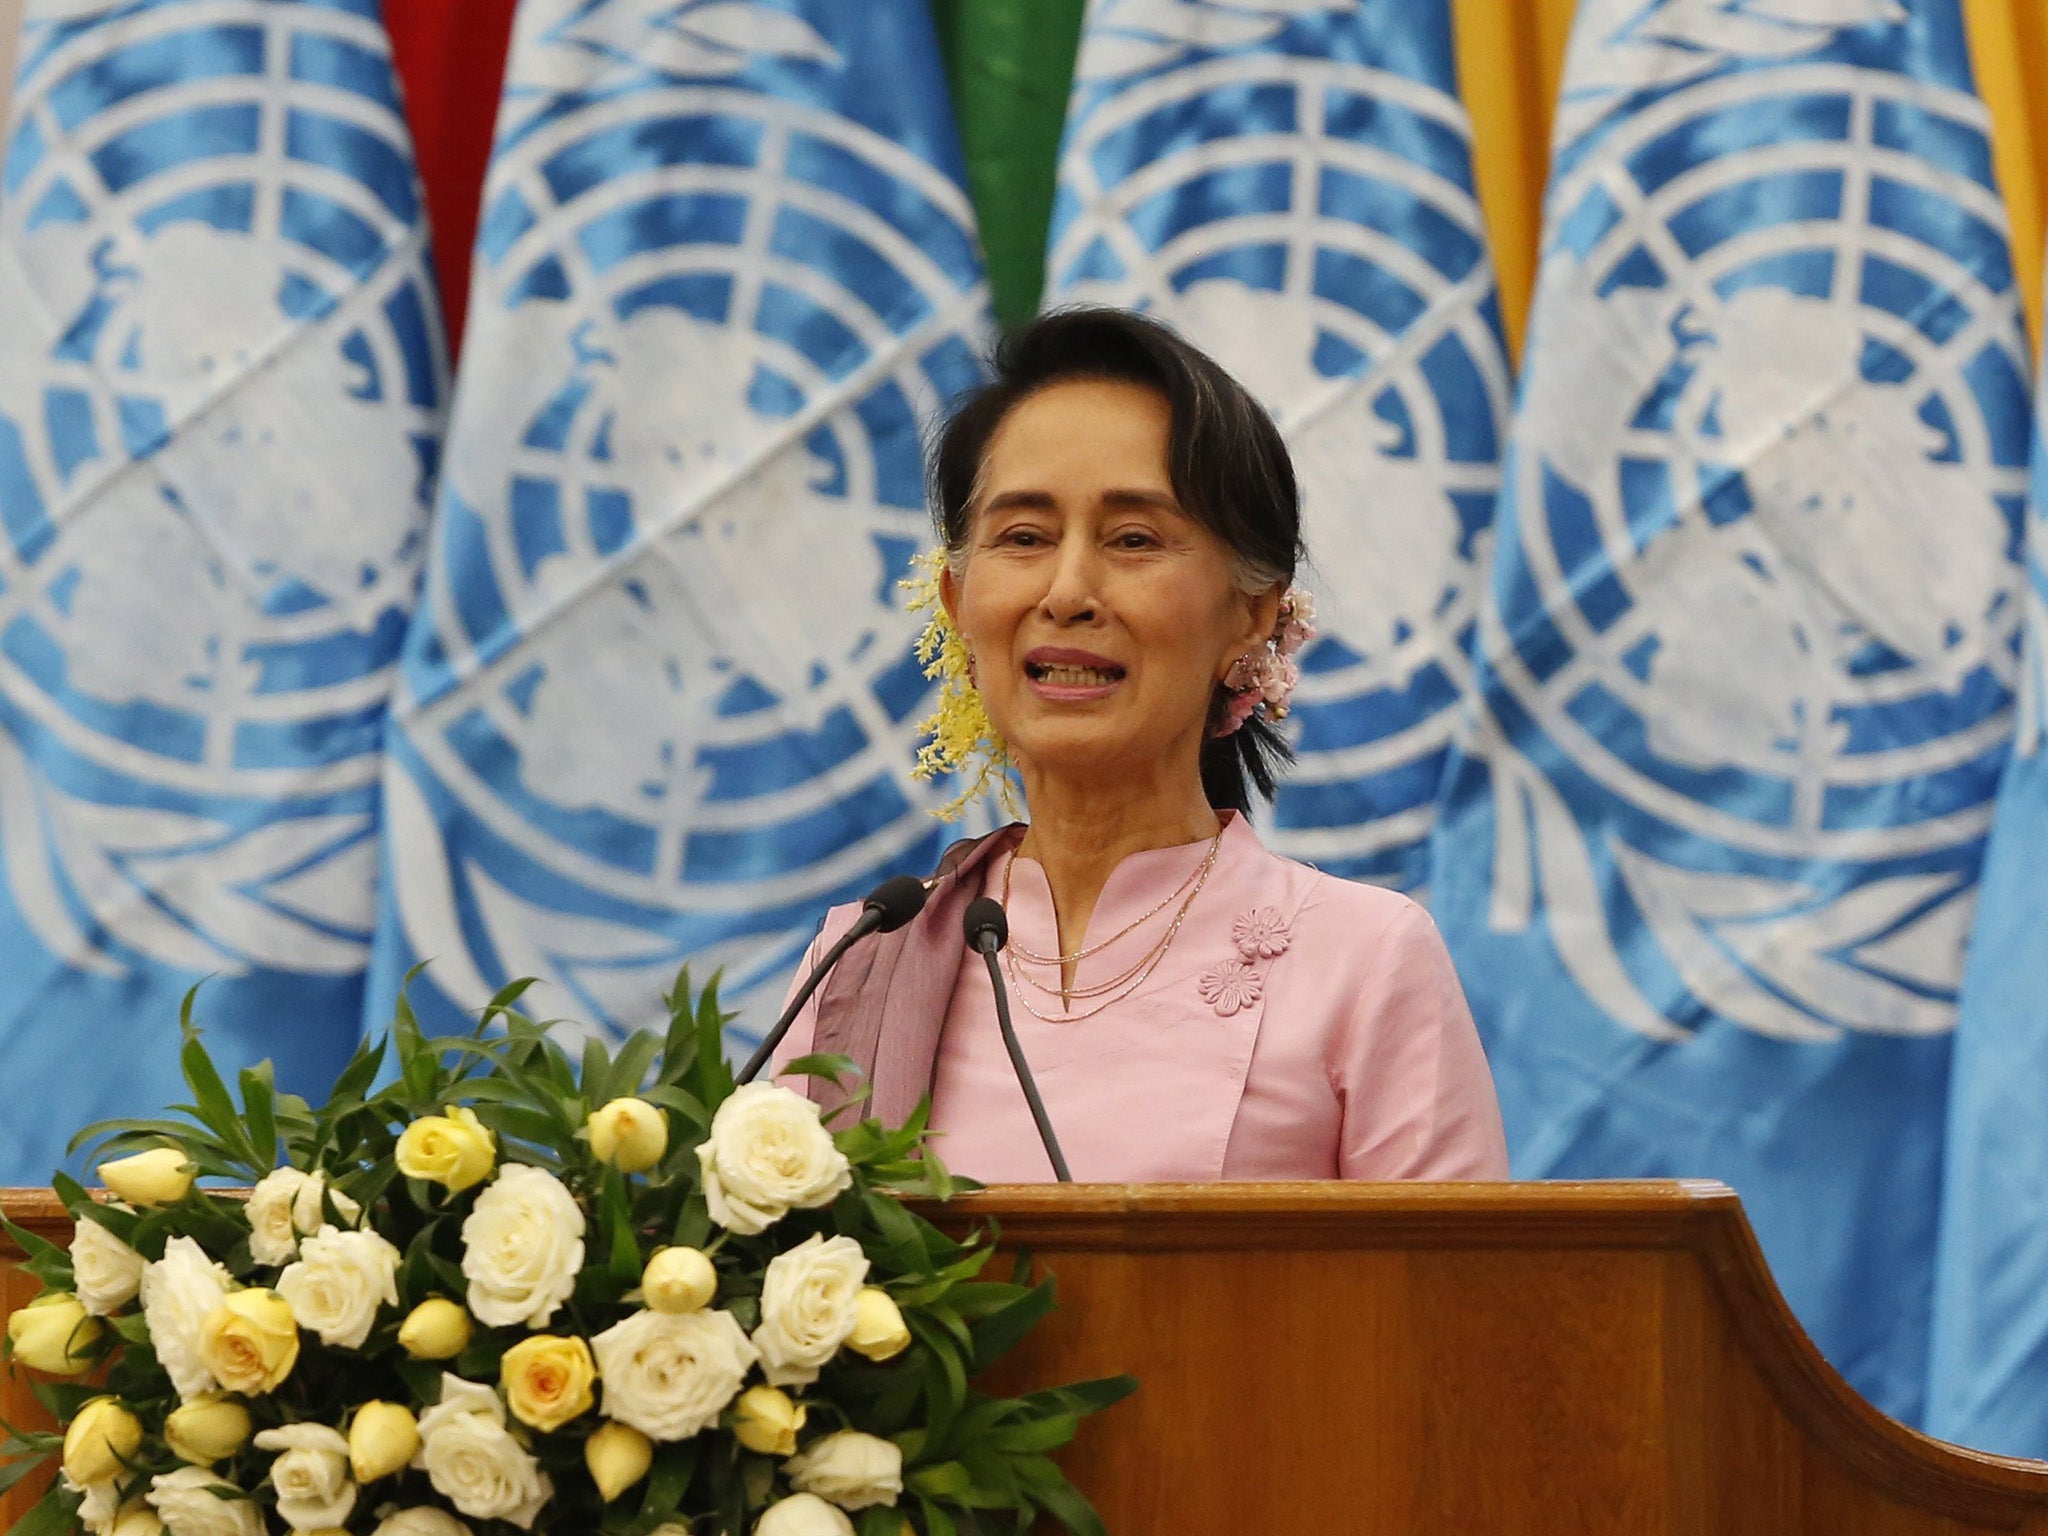 UN reports of mass killings of Rohingya Muslims in Burma are an 'internal affair', said a spokesperson for the country's leader Aung San Suu Kyi